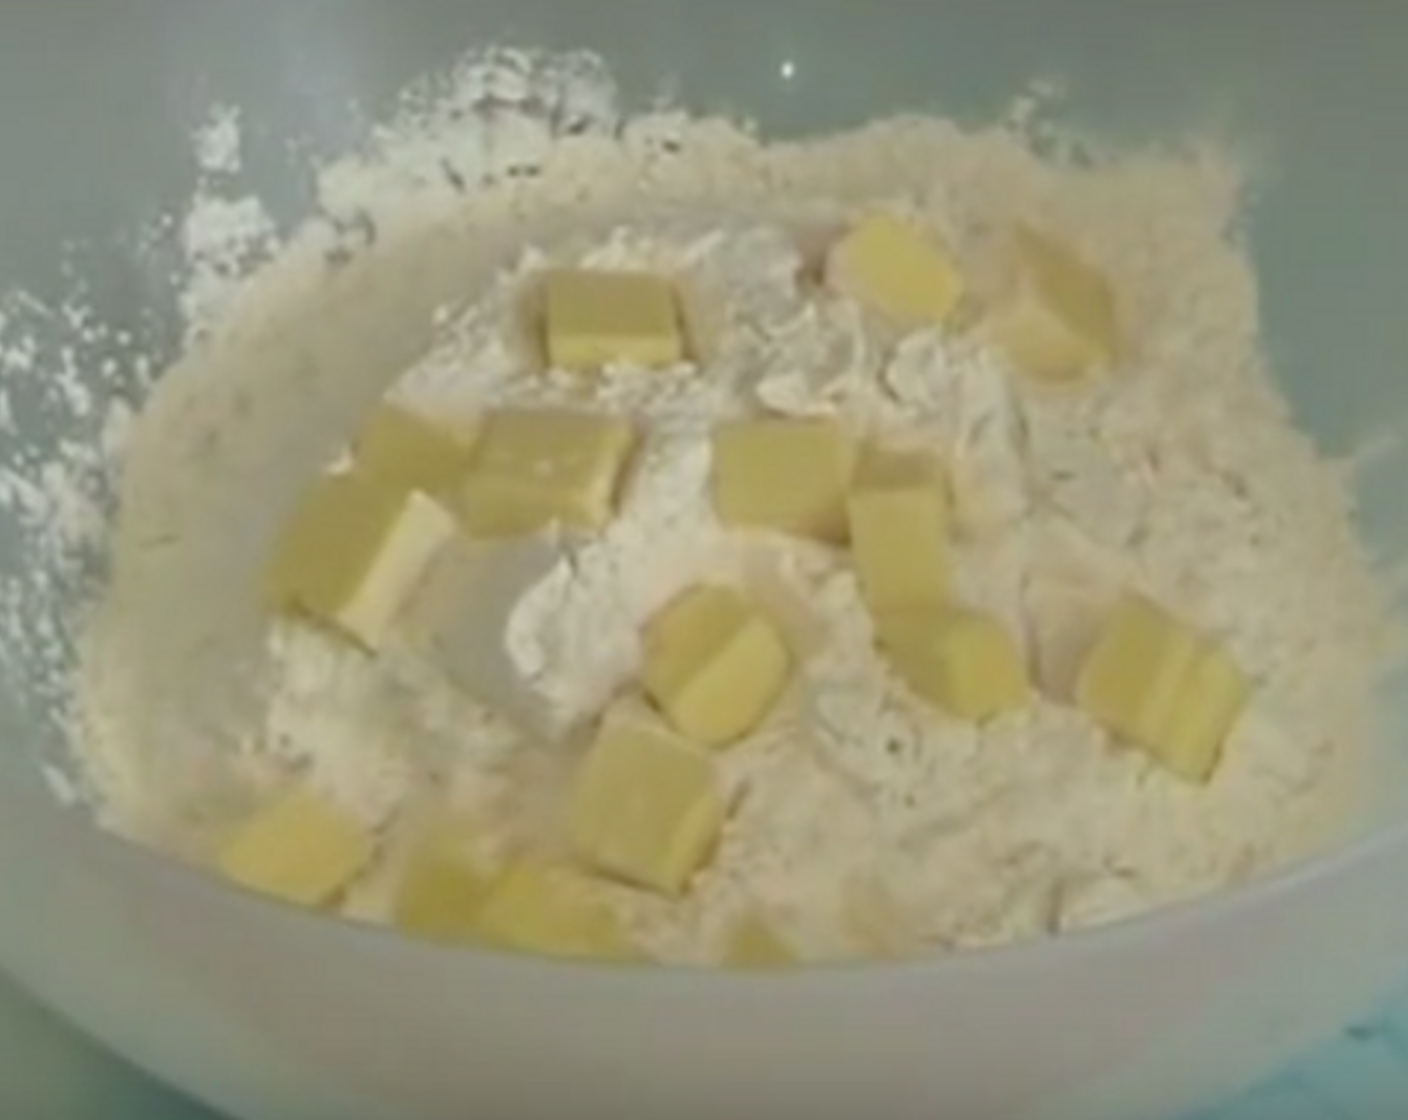 step 2 Put Self-Rising Flour (2 1/4 cups) and Butter (1/4 cup) in one bowl.